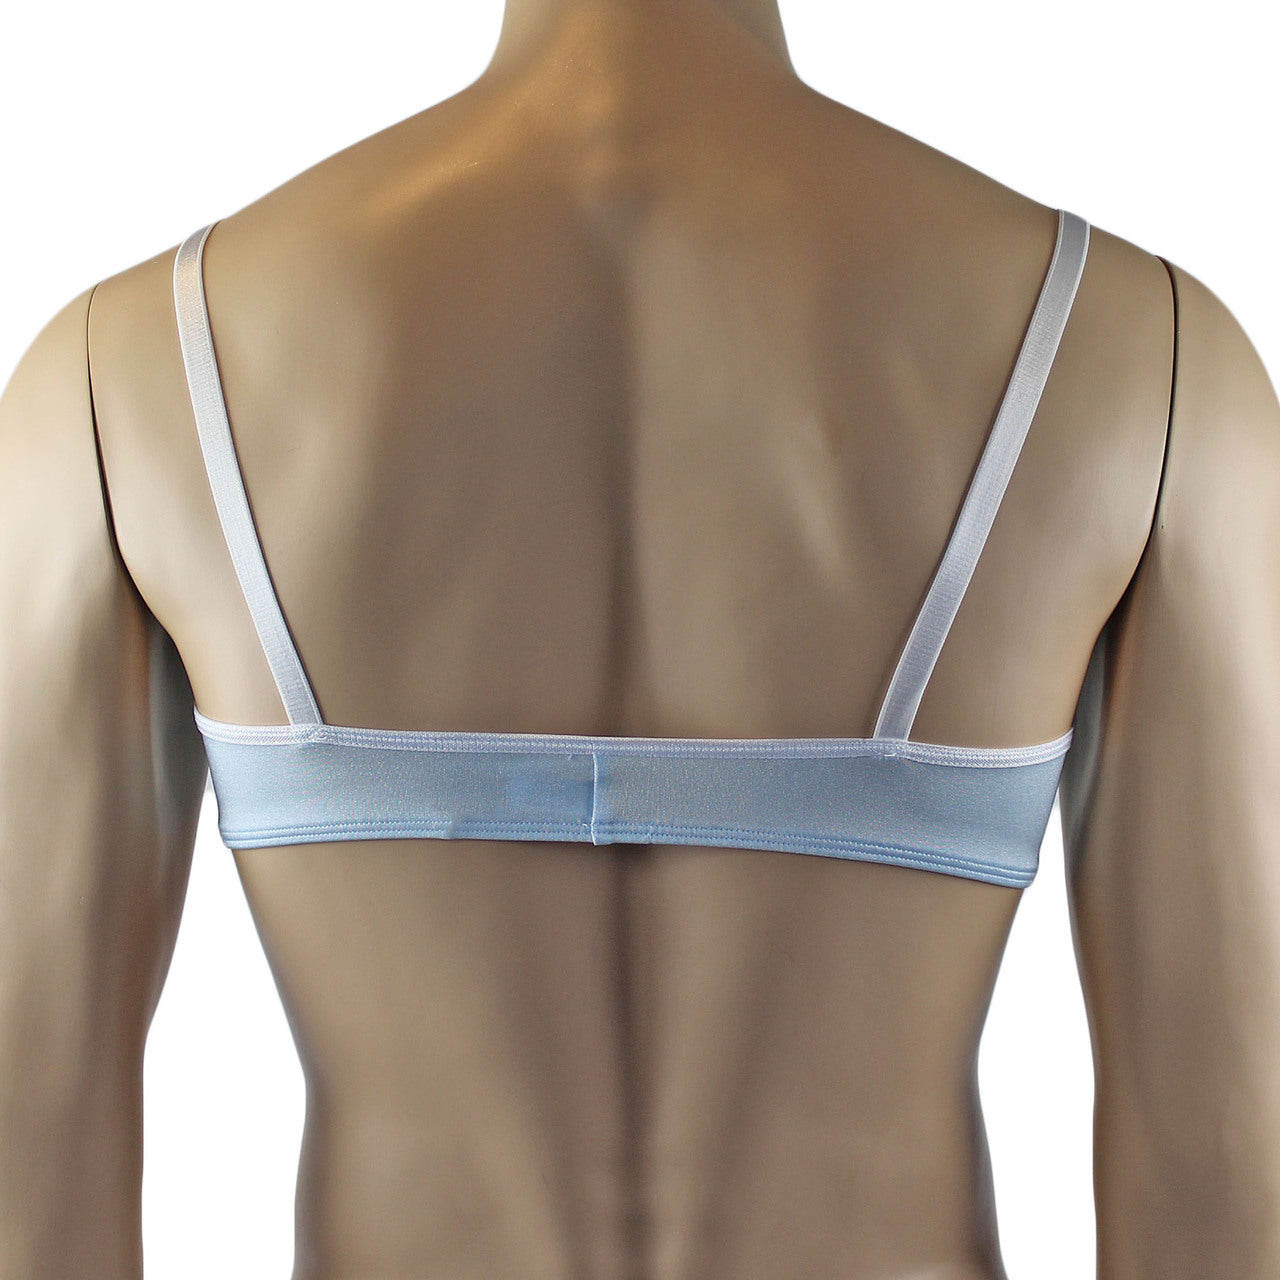 Mens Luxury Spandex & Lace Bra Top and G string Light Blue